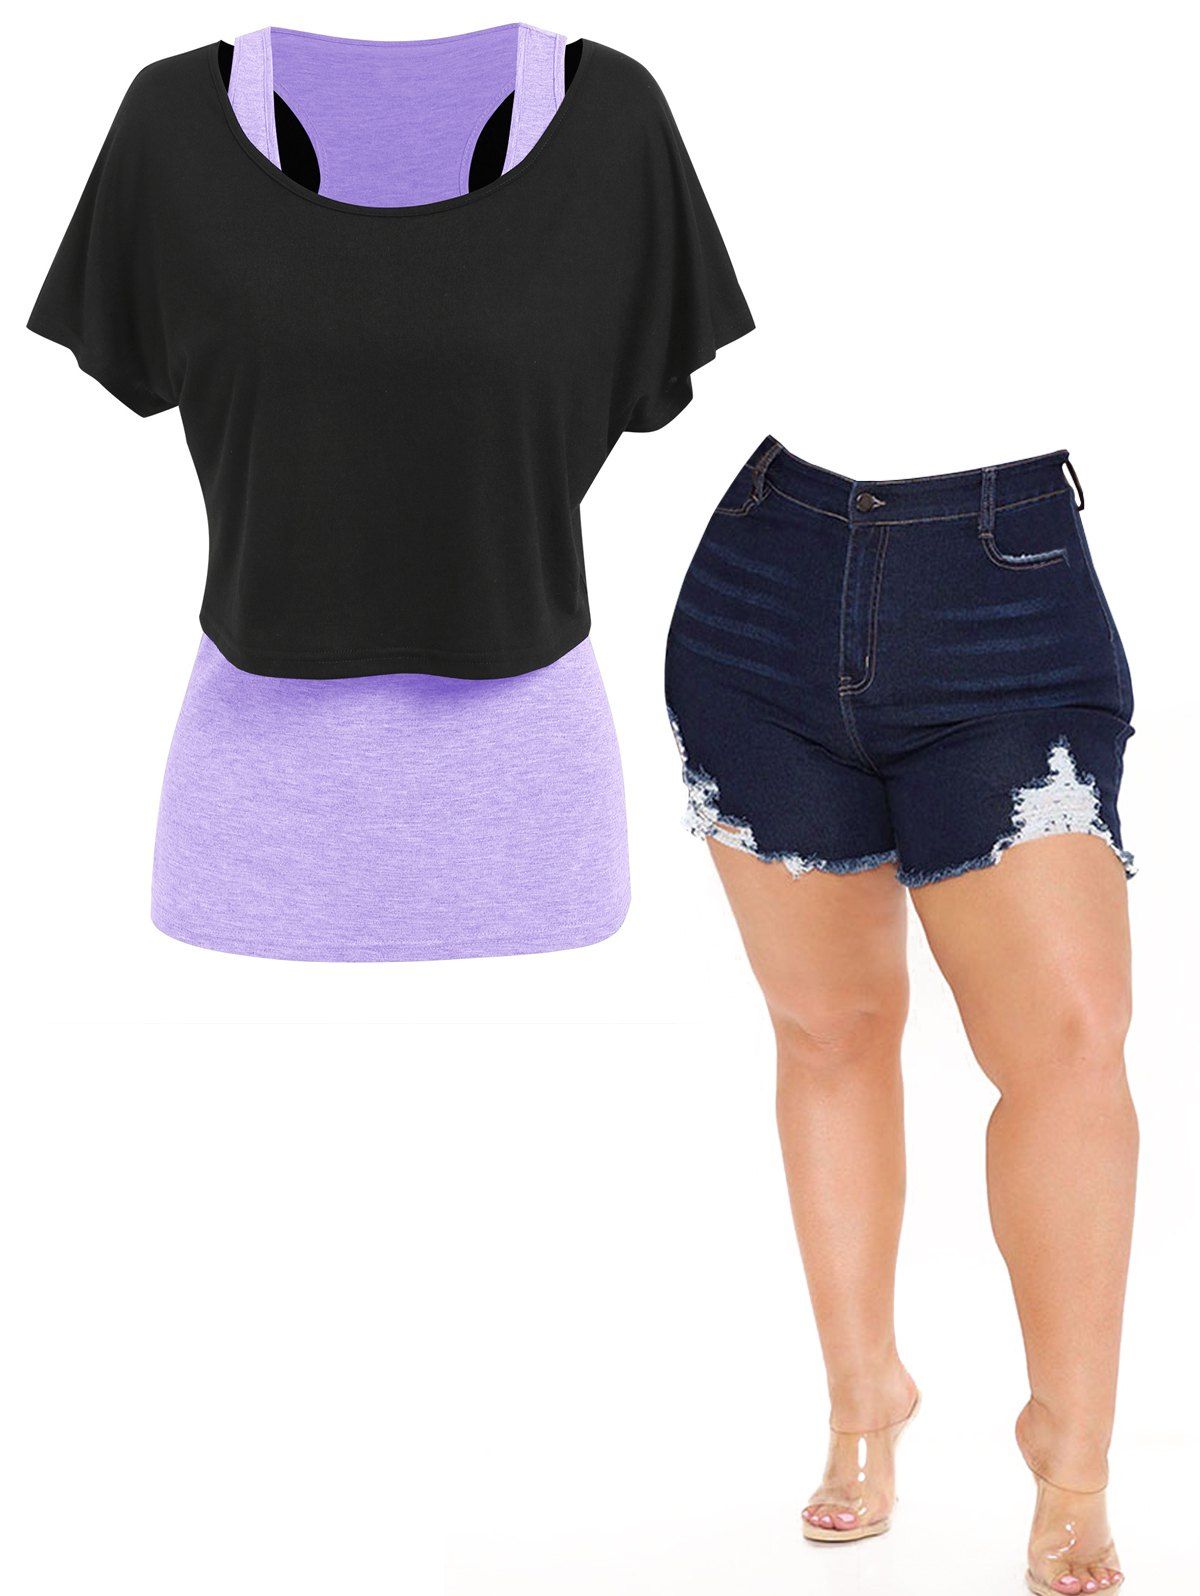 Plus Size Heathered Tank Top Pure Color Cropped T Shirt And Ripped Denim Shorts Summer Outfit - multicolor L